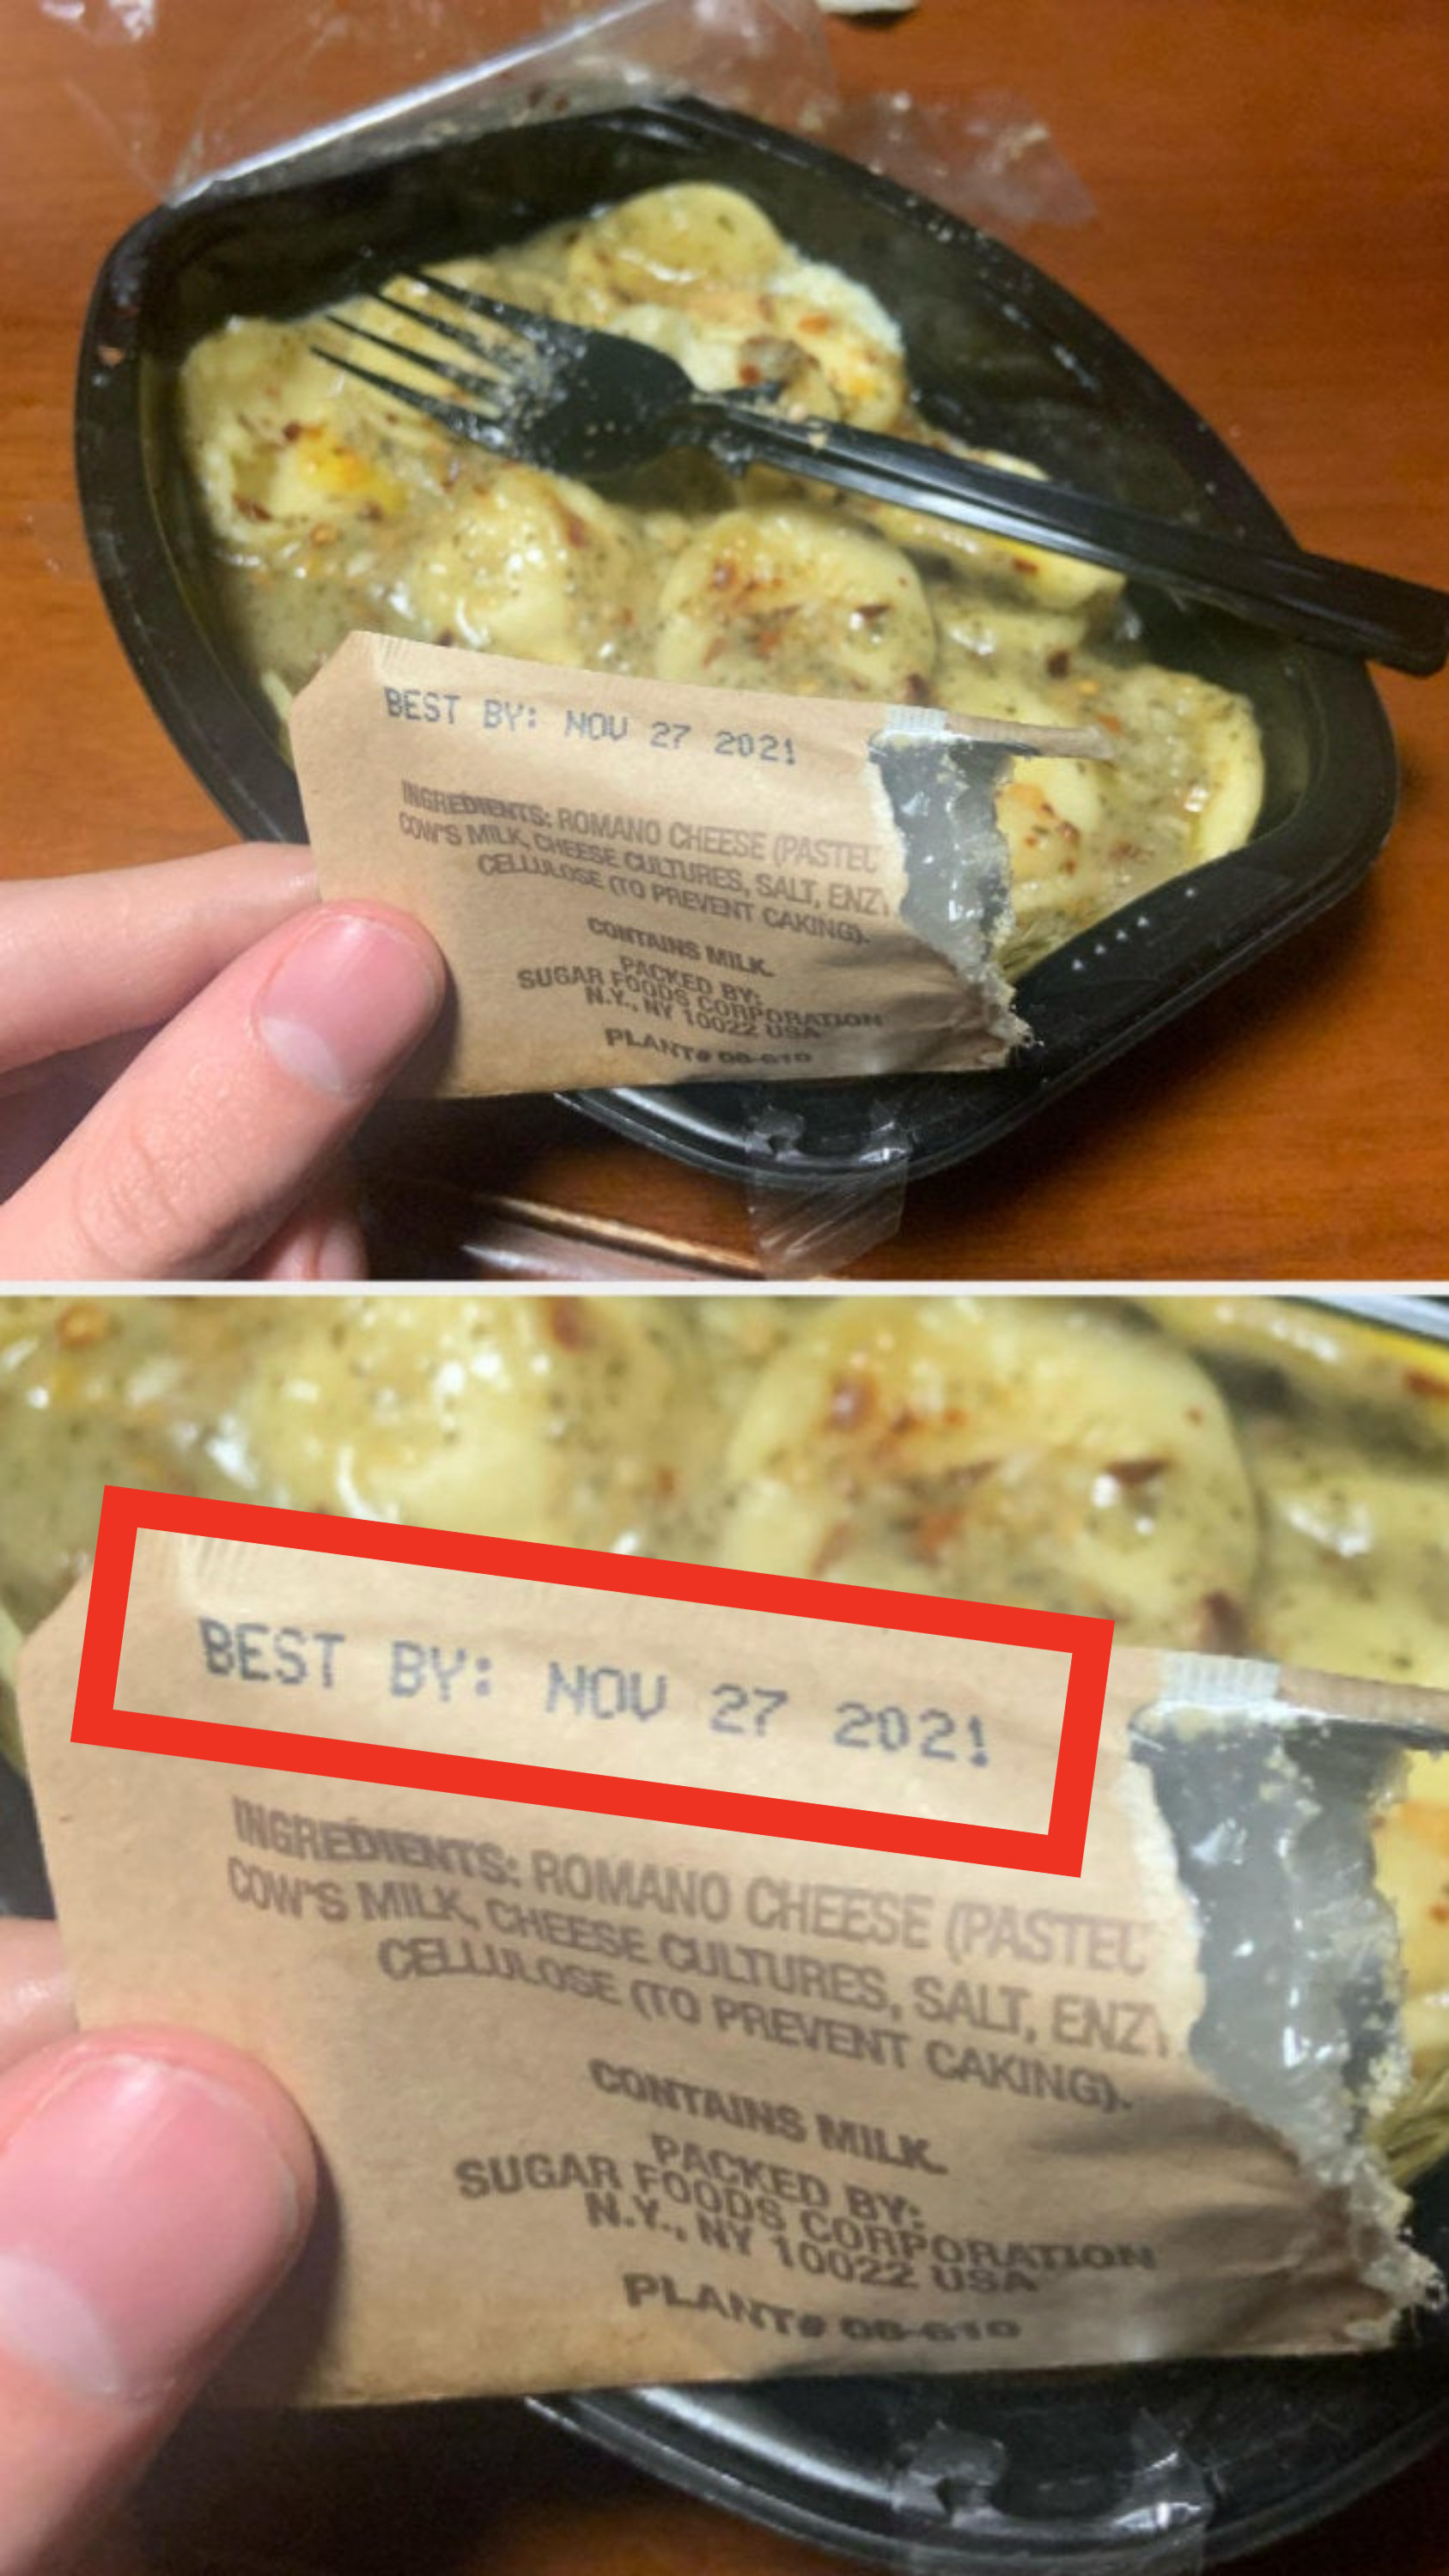 The best by date says November 2021